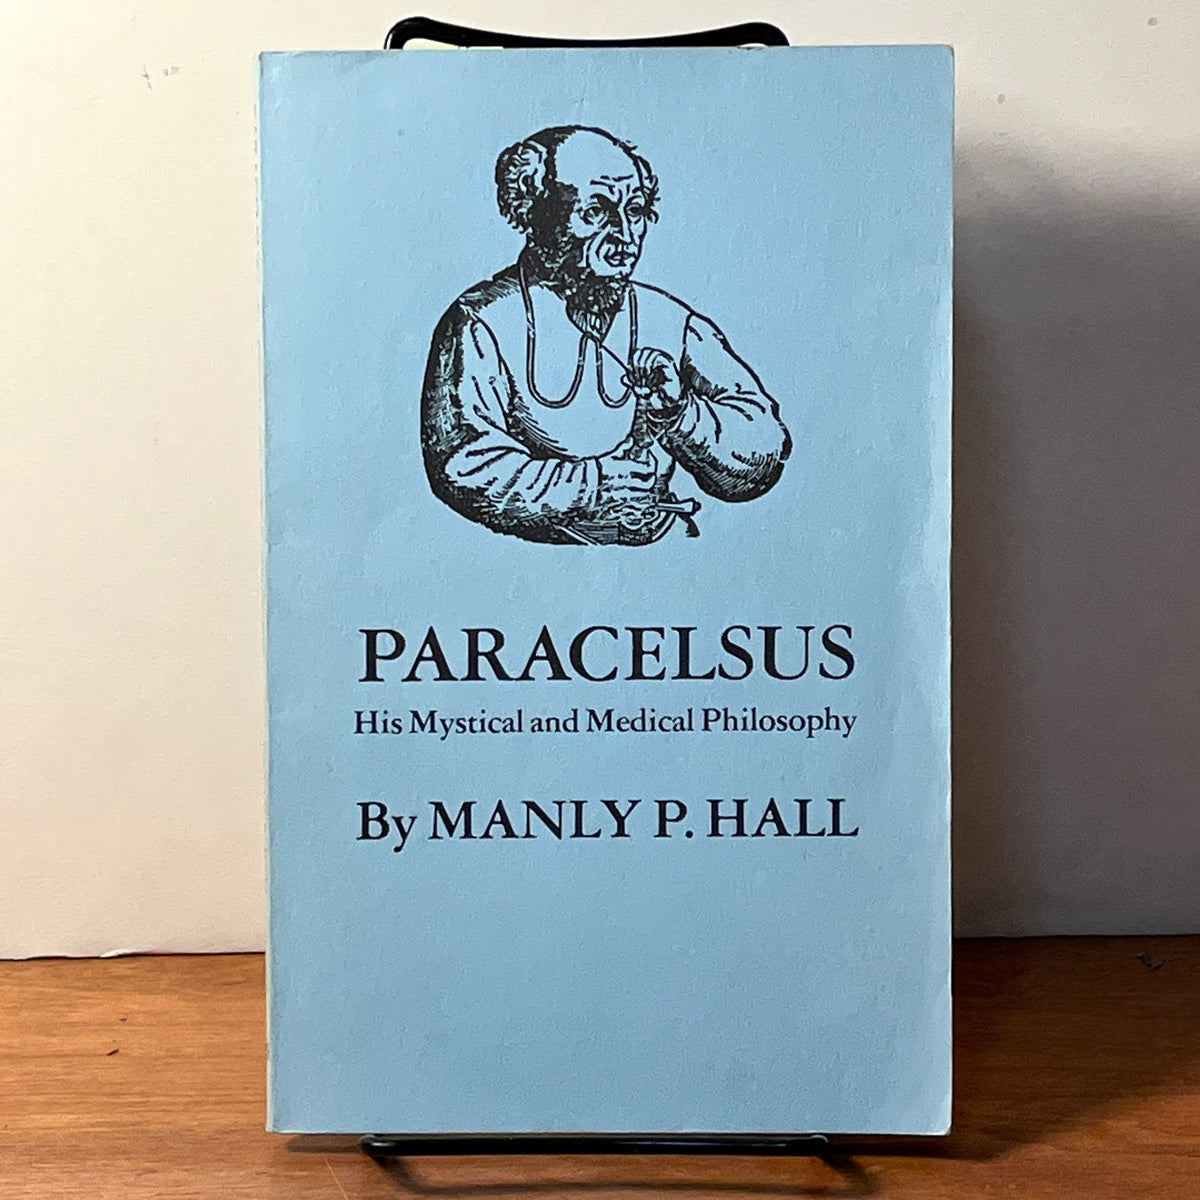 Paracelsus: His Mystical and Medical Philosophy. Manly P. Hall. VG SC. 1980 Reprint.